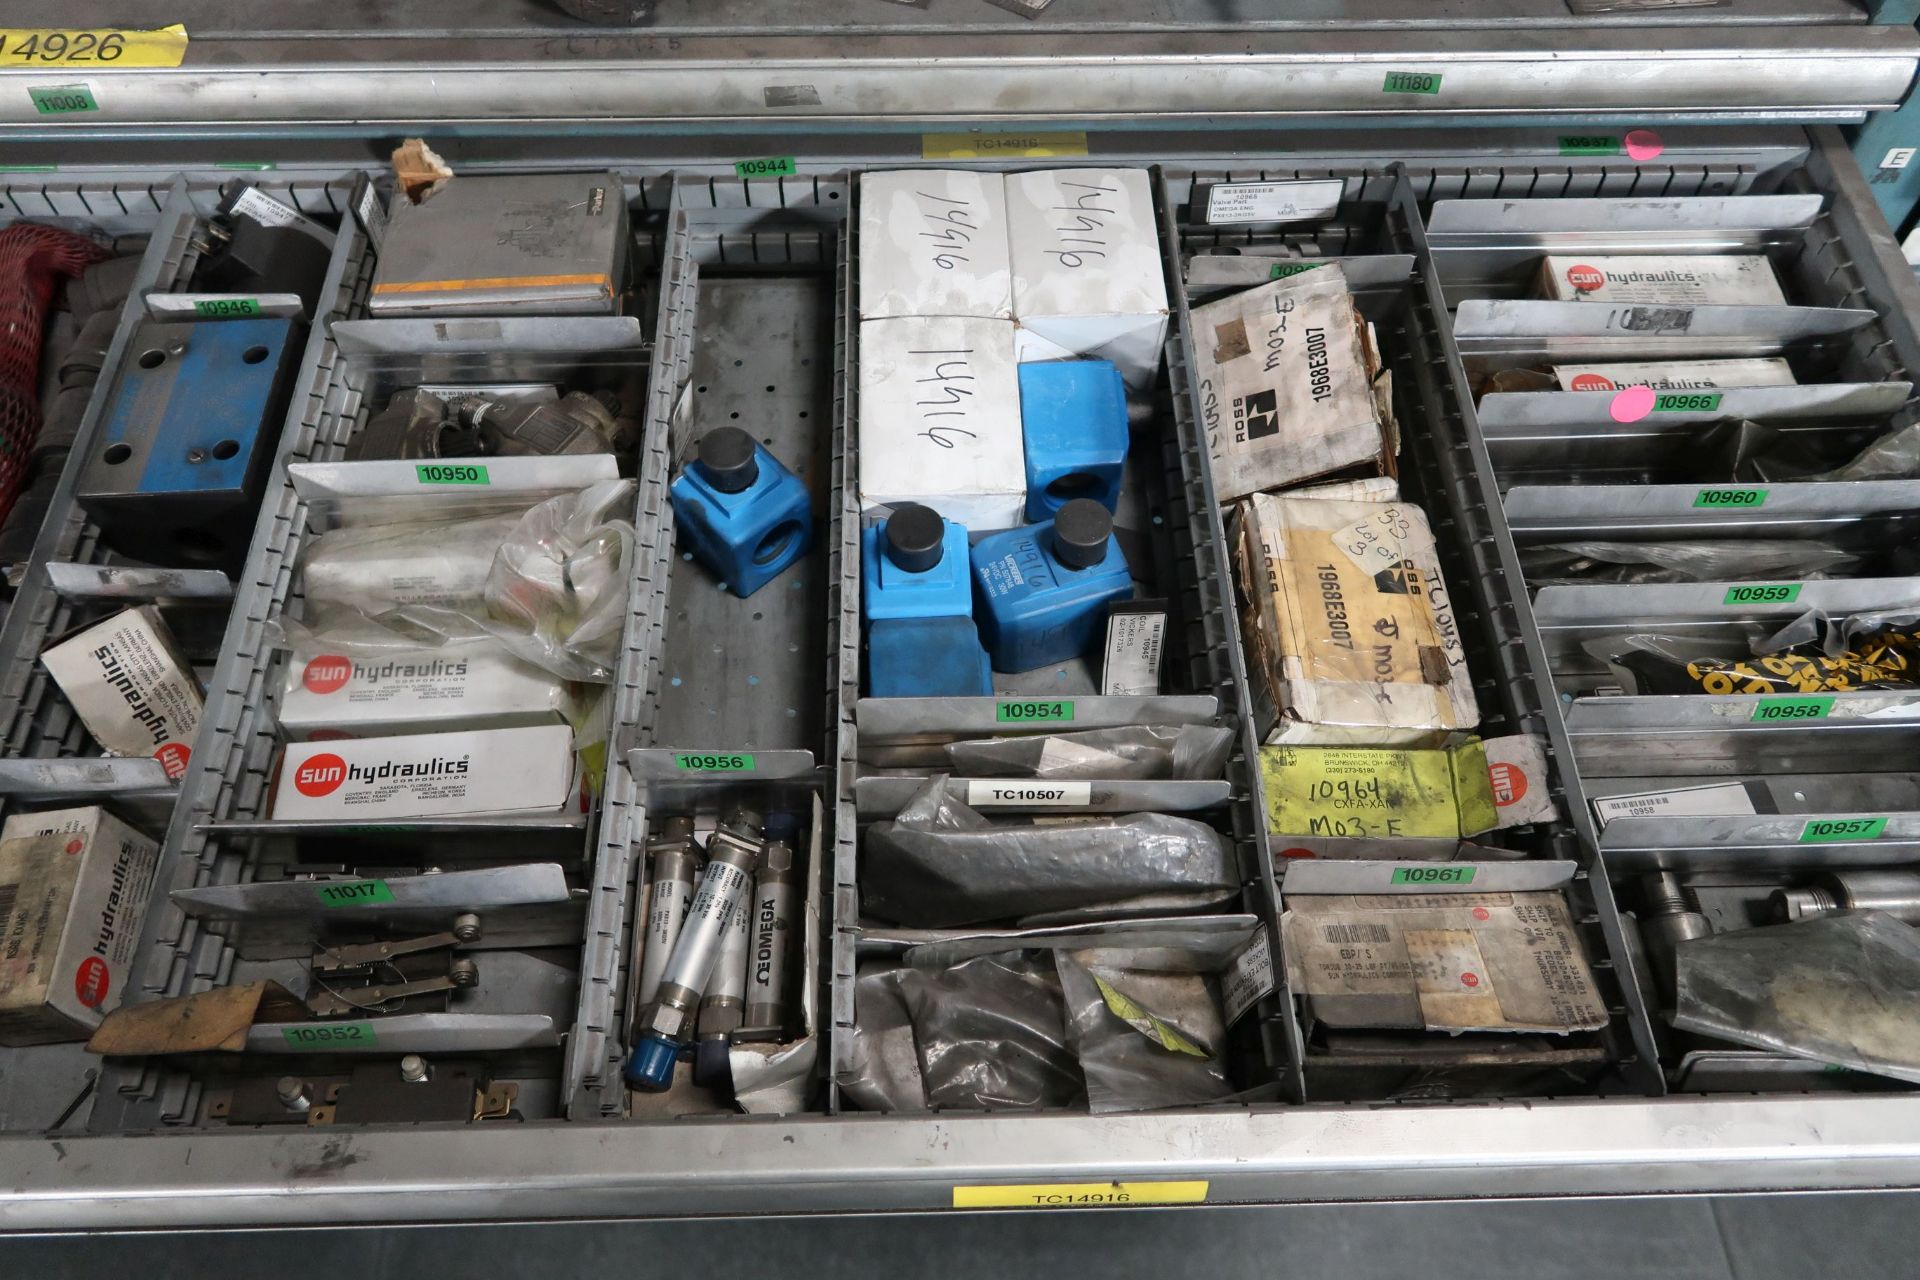 TOOLING CABINETS WITH CONTENTS - MOSTLY MACHINE PARTS **LOADING PRICE DUE TO ERRA - $2,000.00** - Image 16 of 59